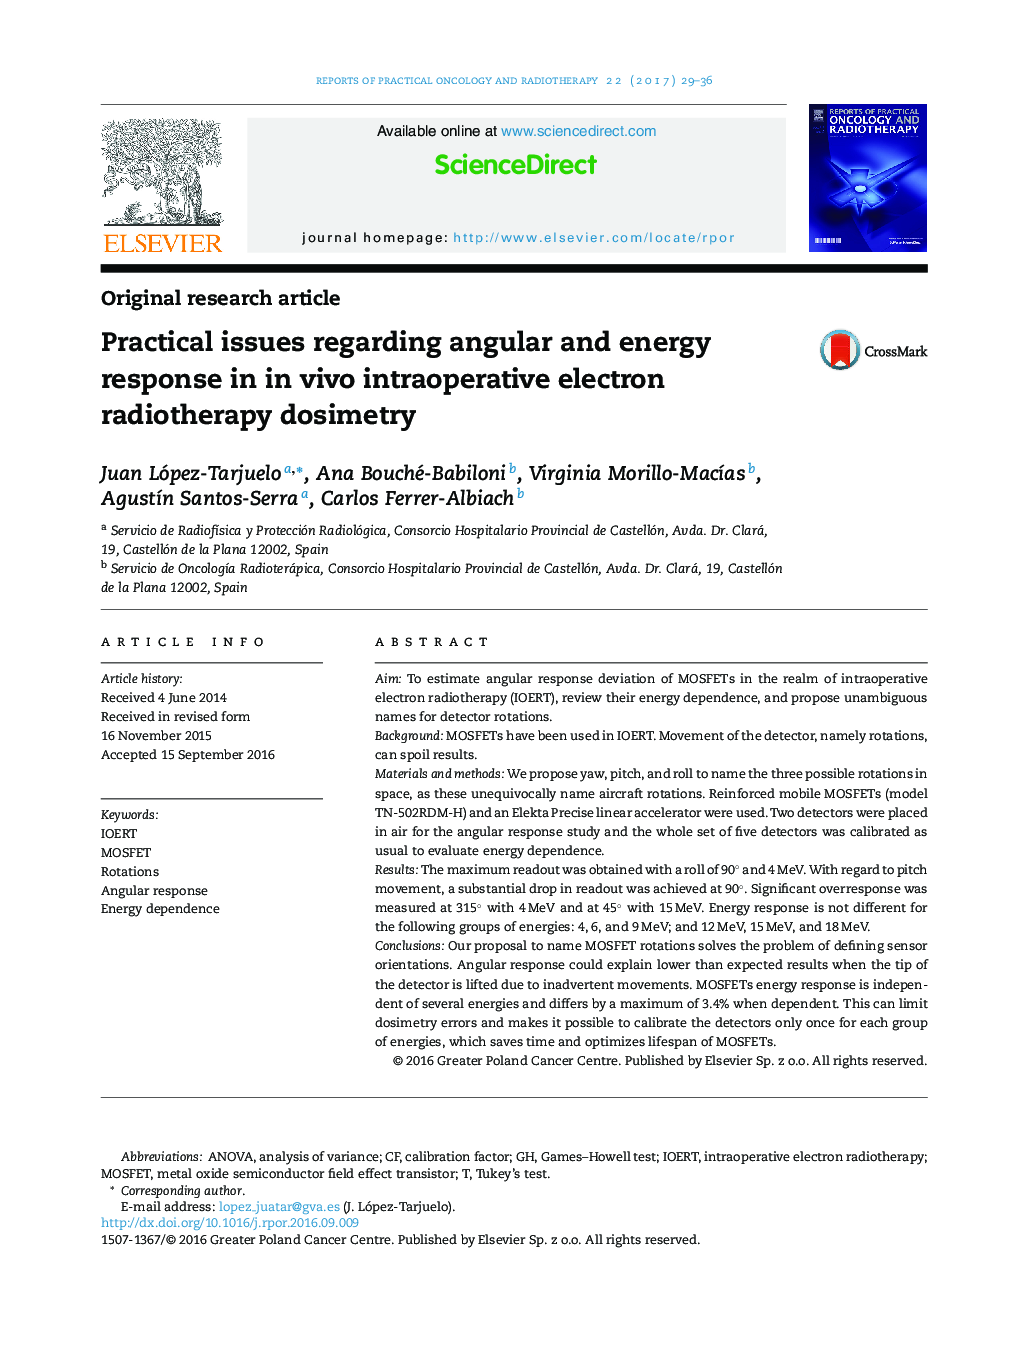 Practical issues regarding angular and energy response in in vivo intraoperative electron radiotherapy dosimetry